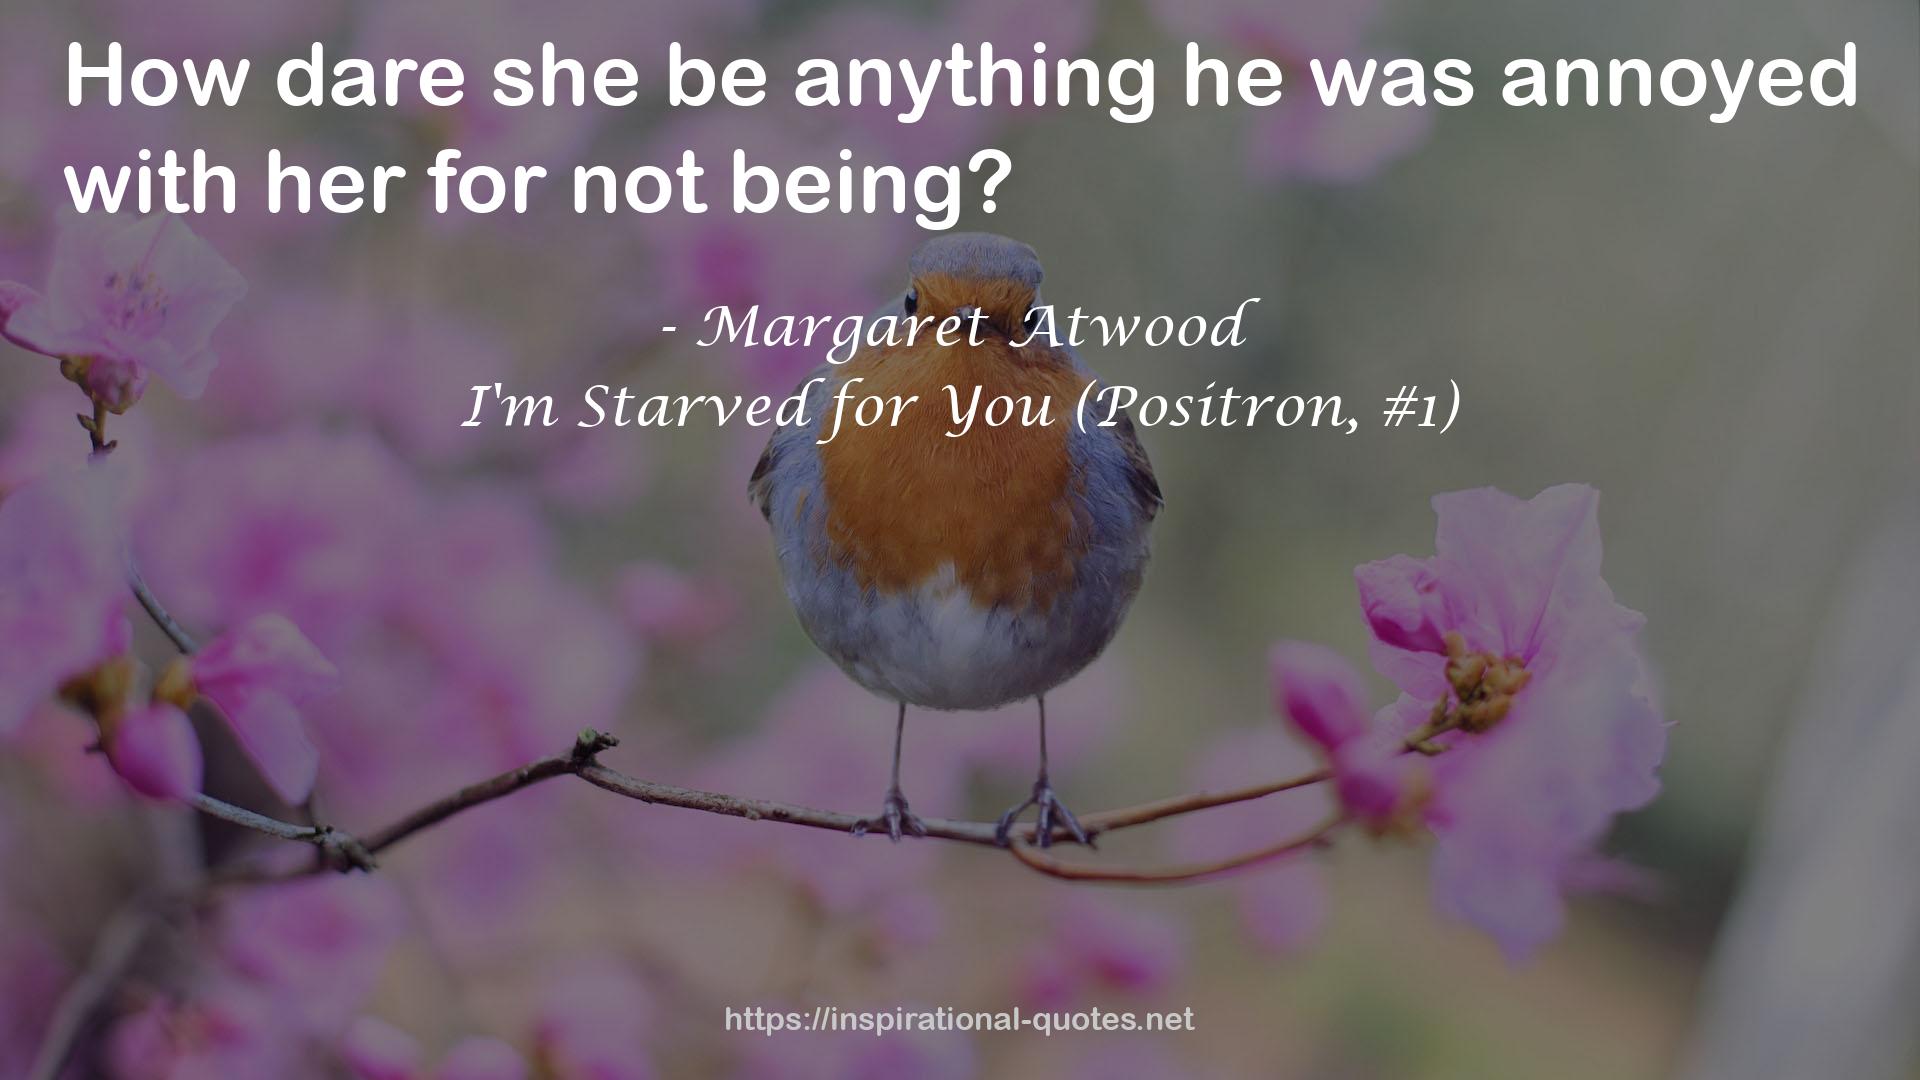 I'm Starved for You (Positron, #1) QUOTES